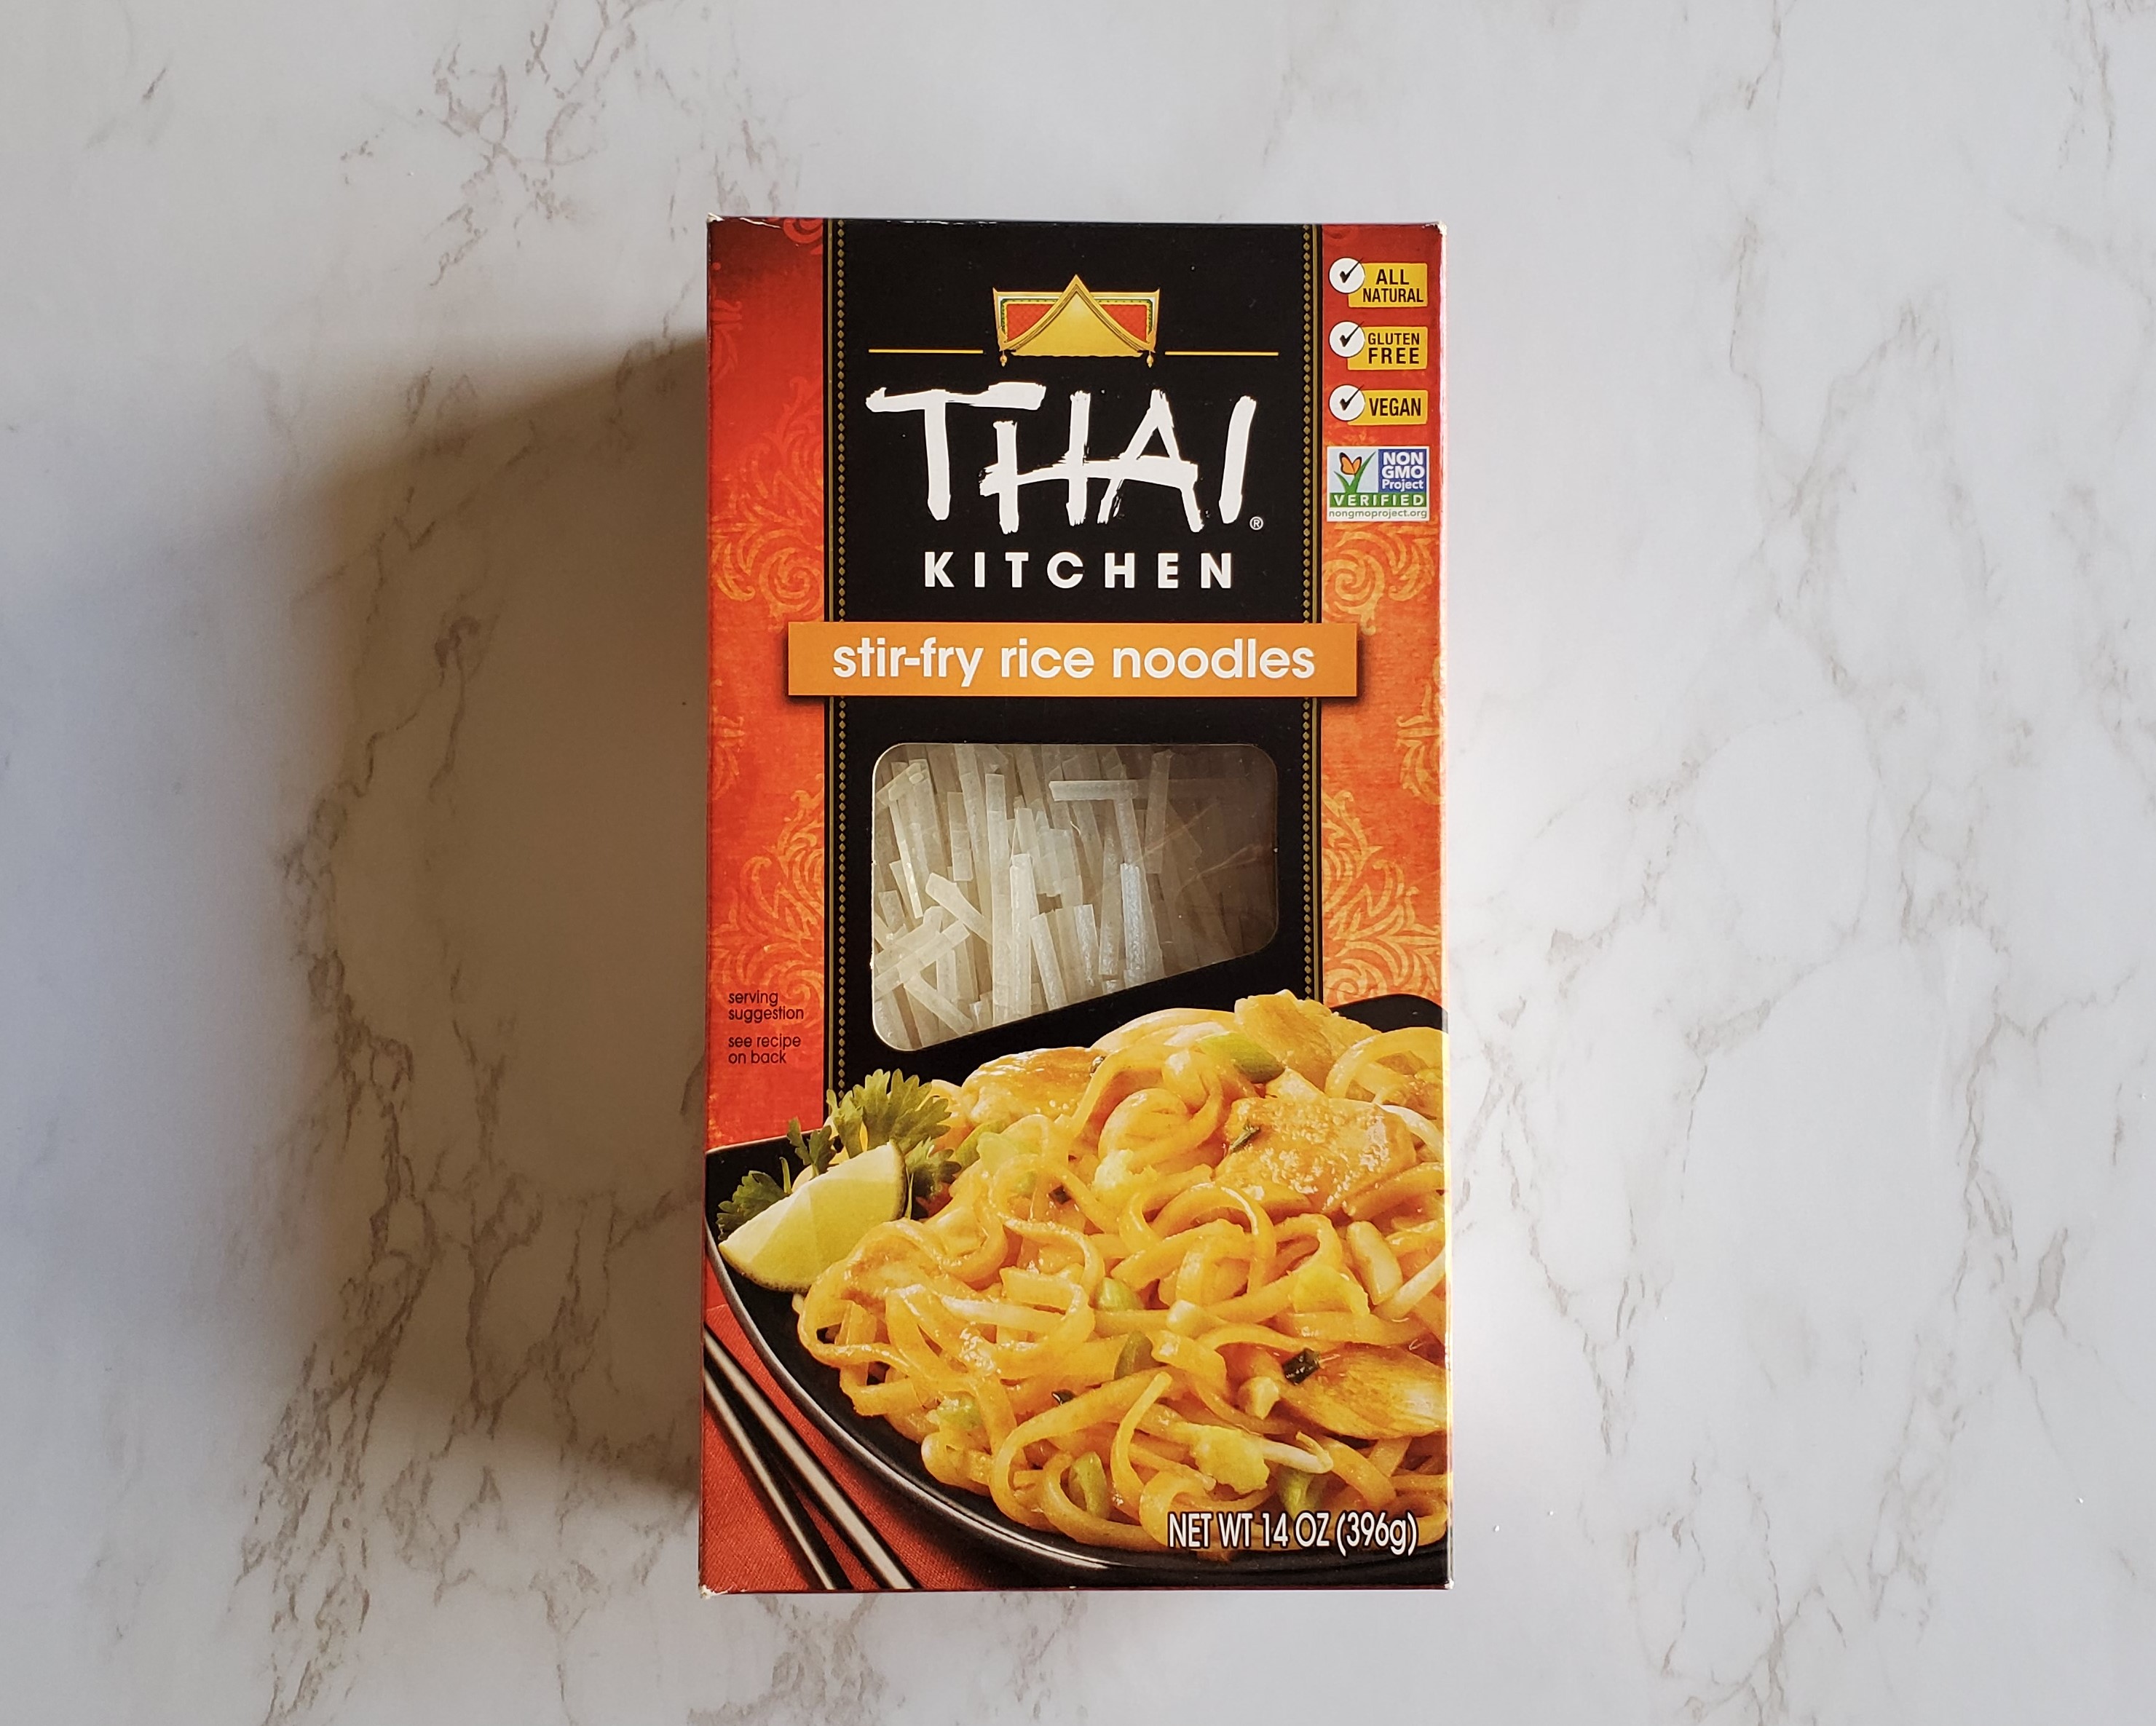 A box of Thai Kitchen stir-fry rice noodles on a white marble background.